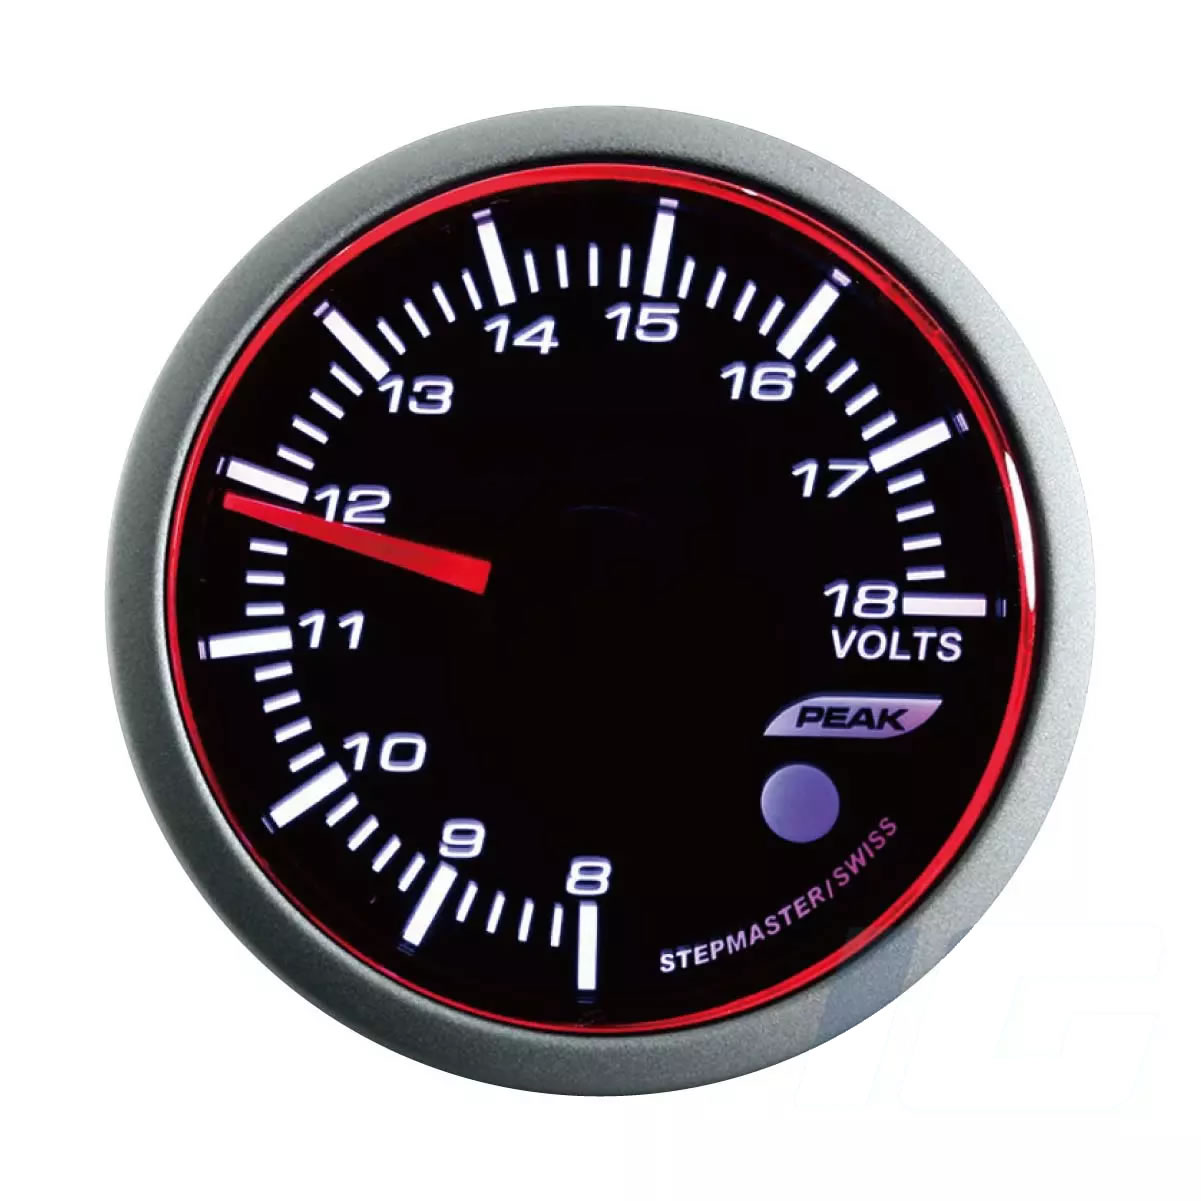 52mm White and Blue and Amber LED Performance Car Gauges - Volt Gauge With Warning and Peak For Your Sport Racing Car